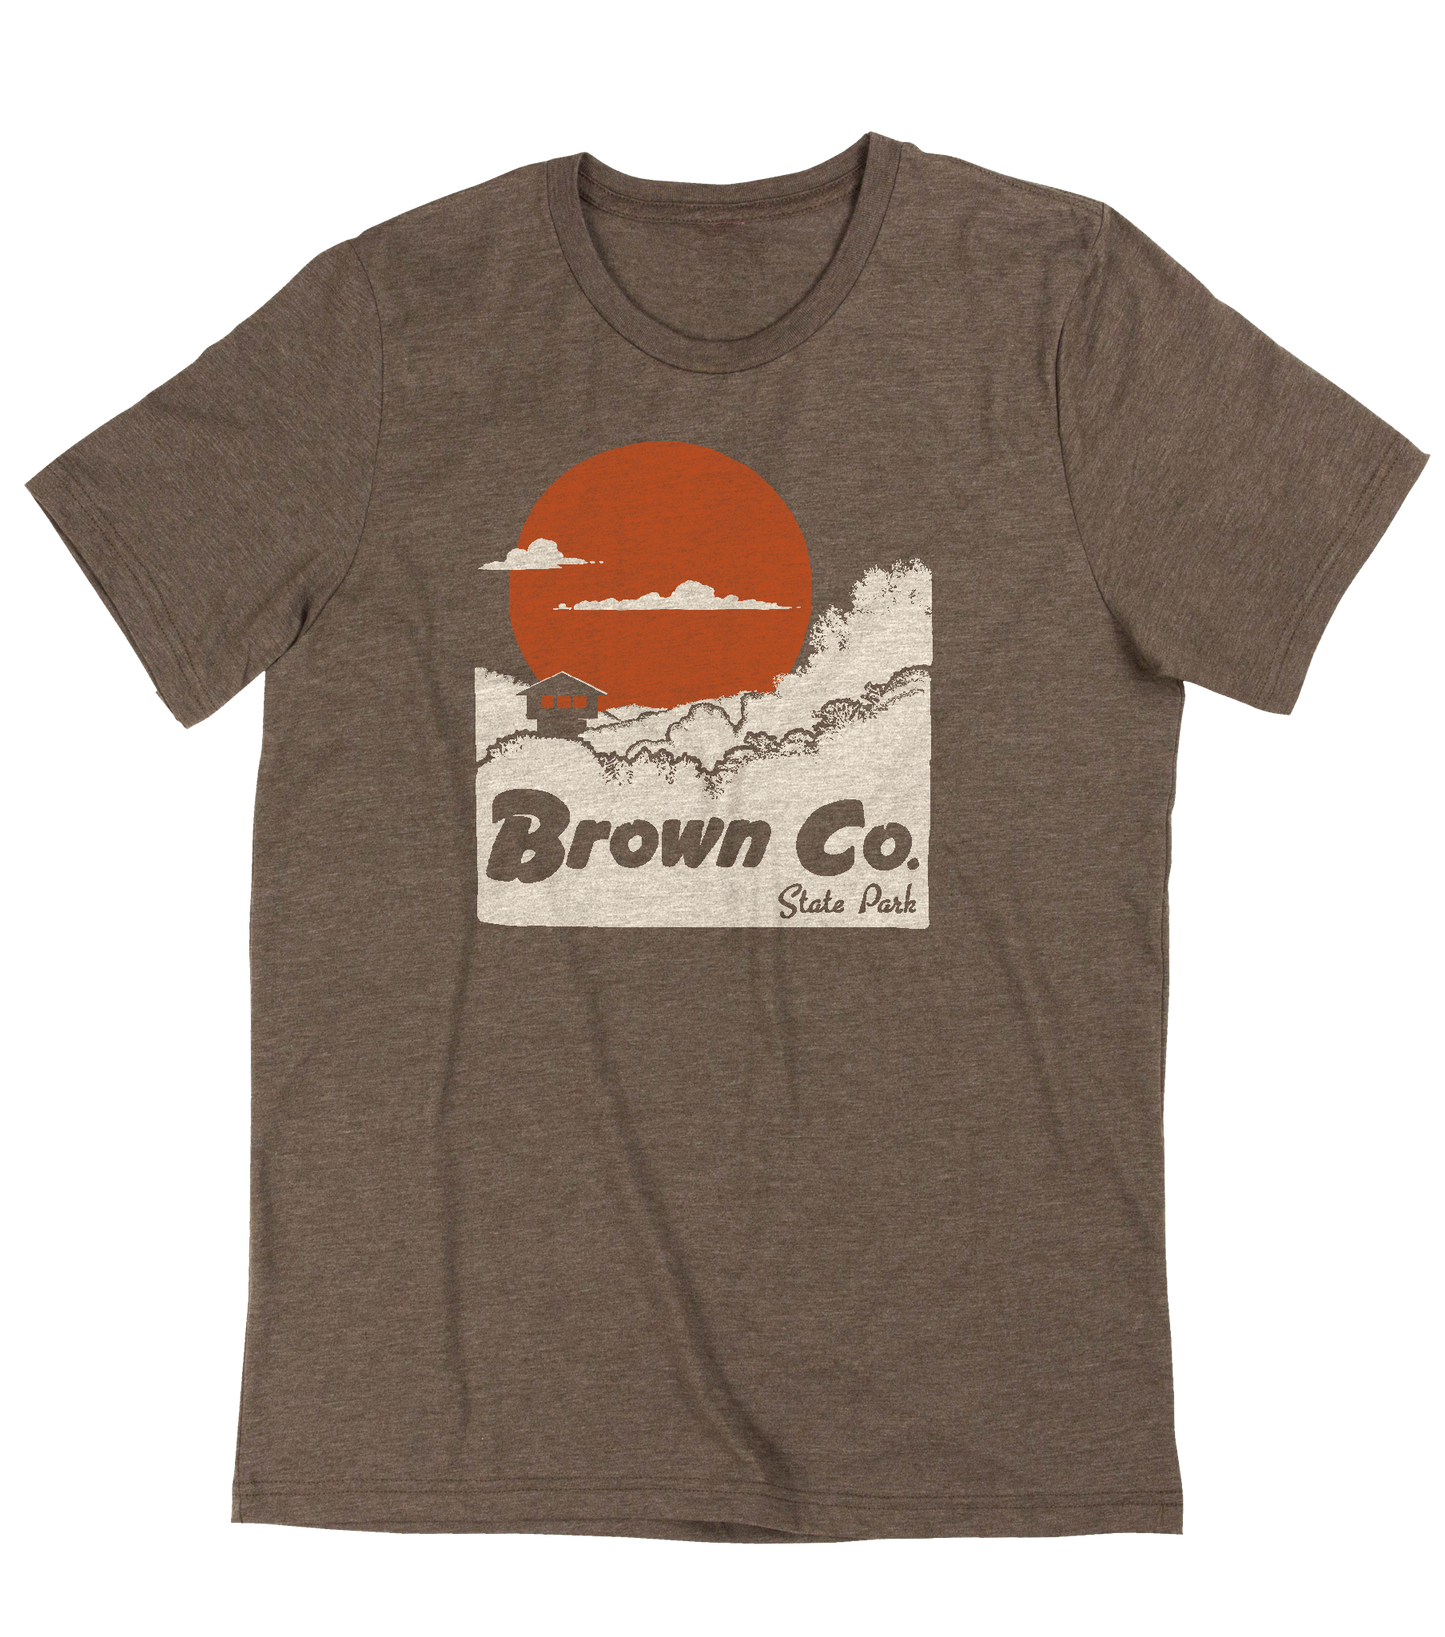 Picture of Brown County Vintage tee shirt.